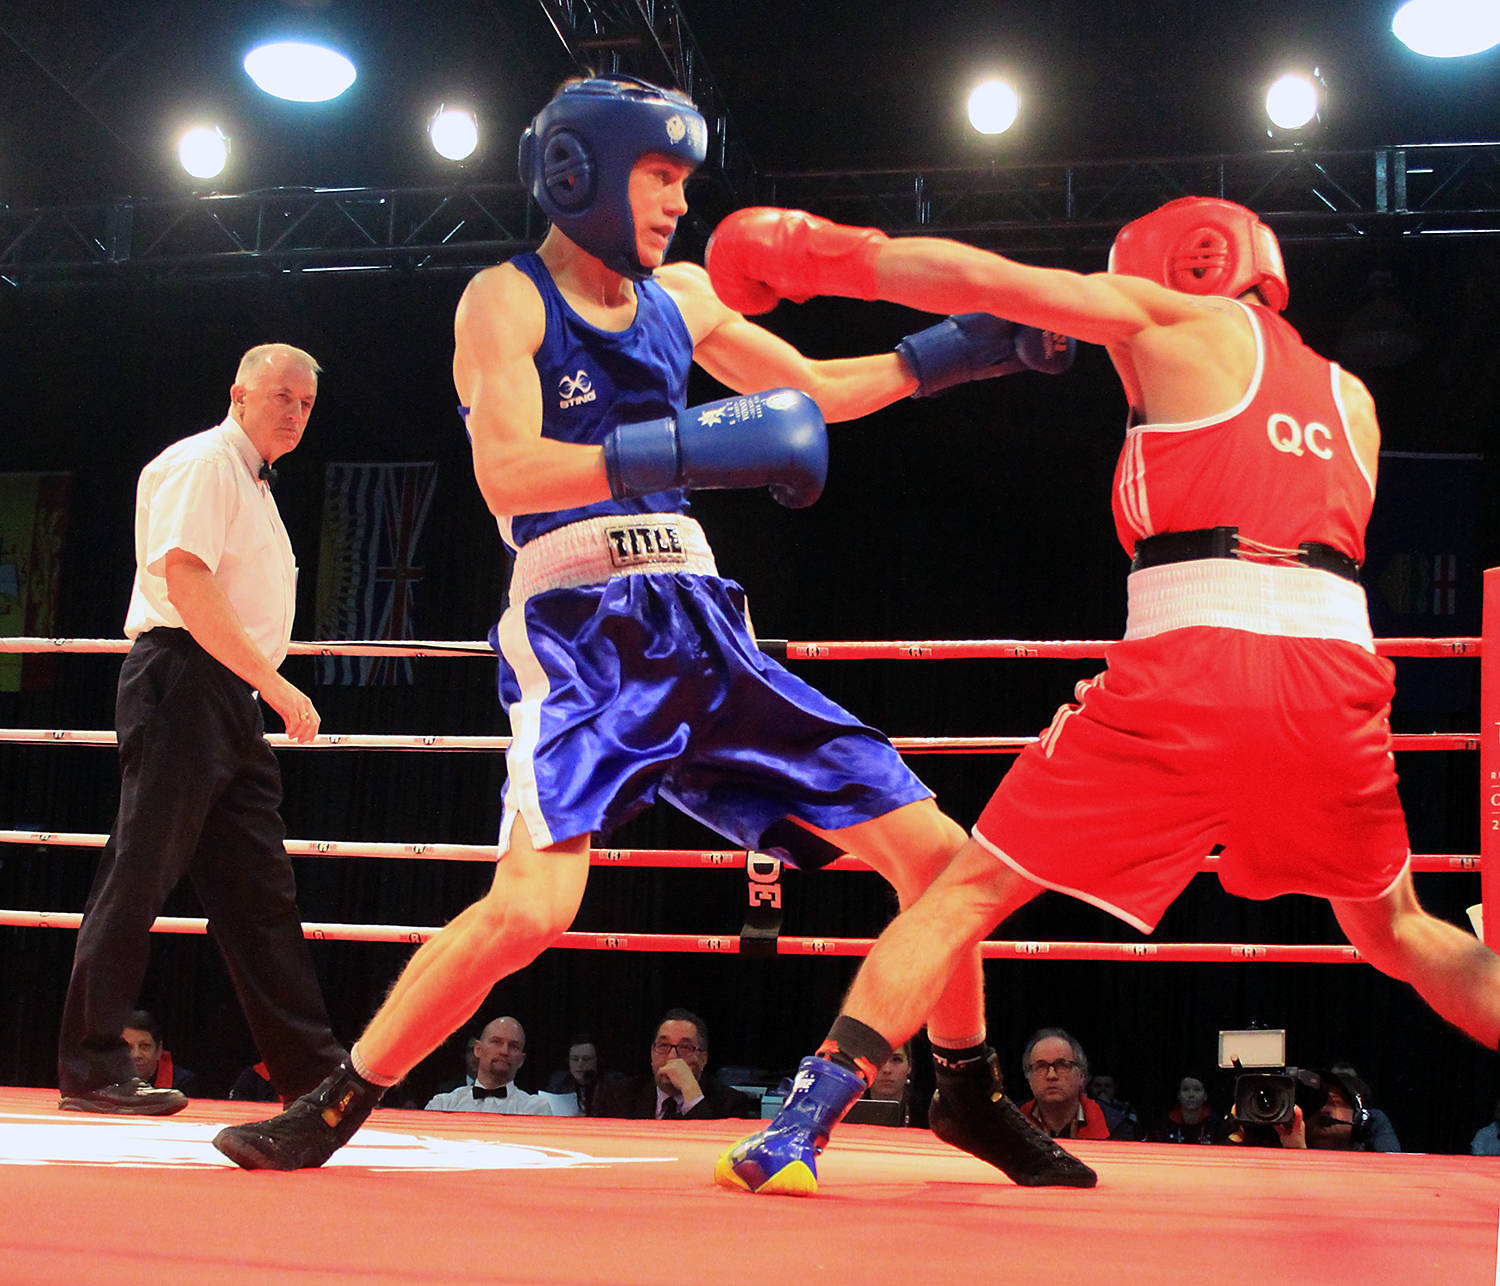 Boxers claim two silver medals for Alberta in wild night